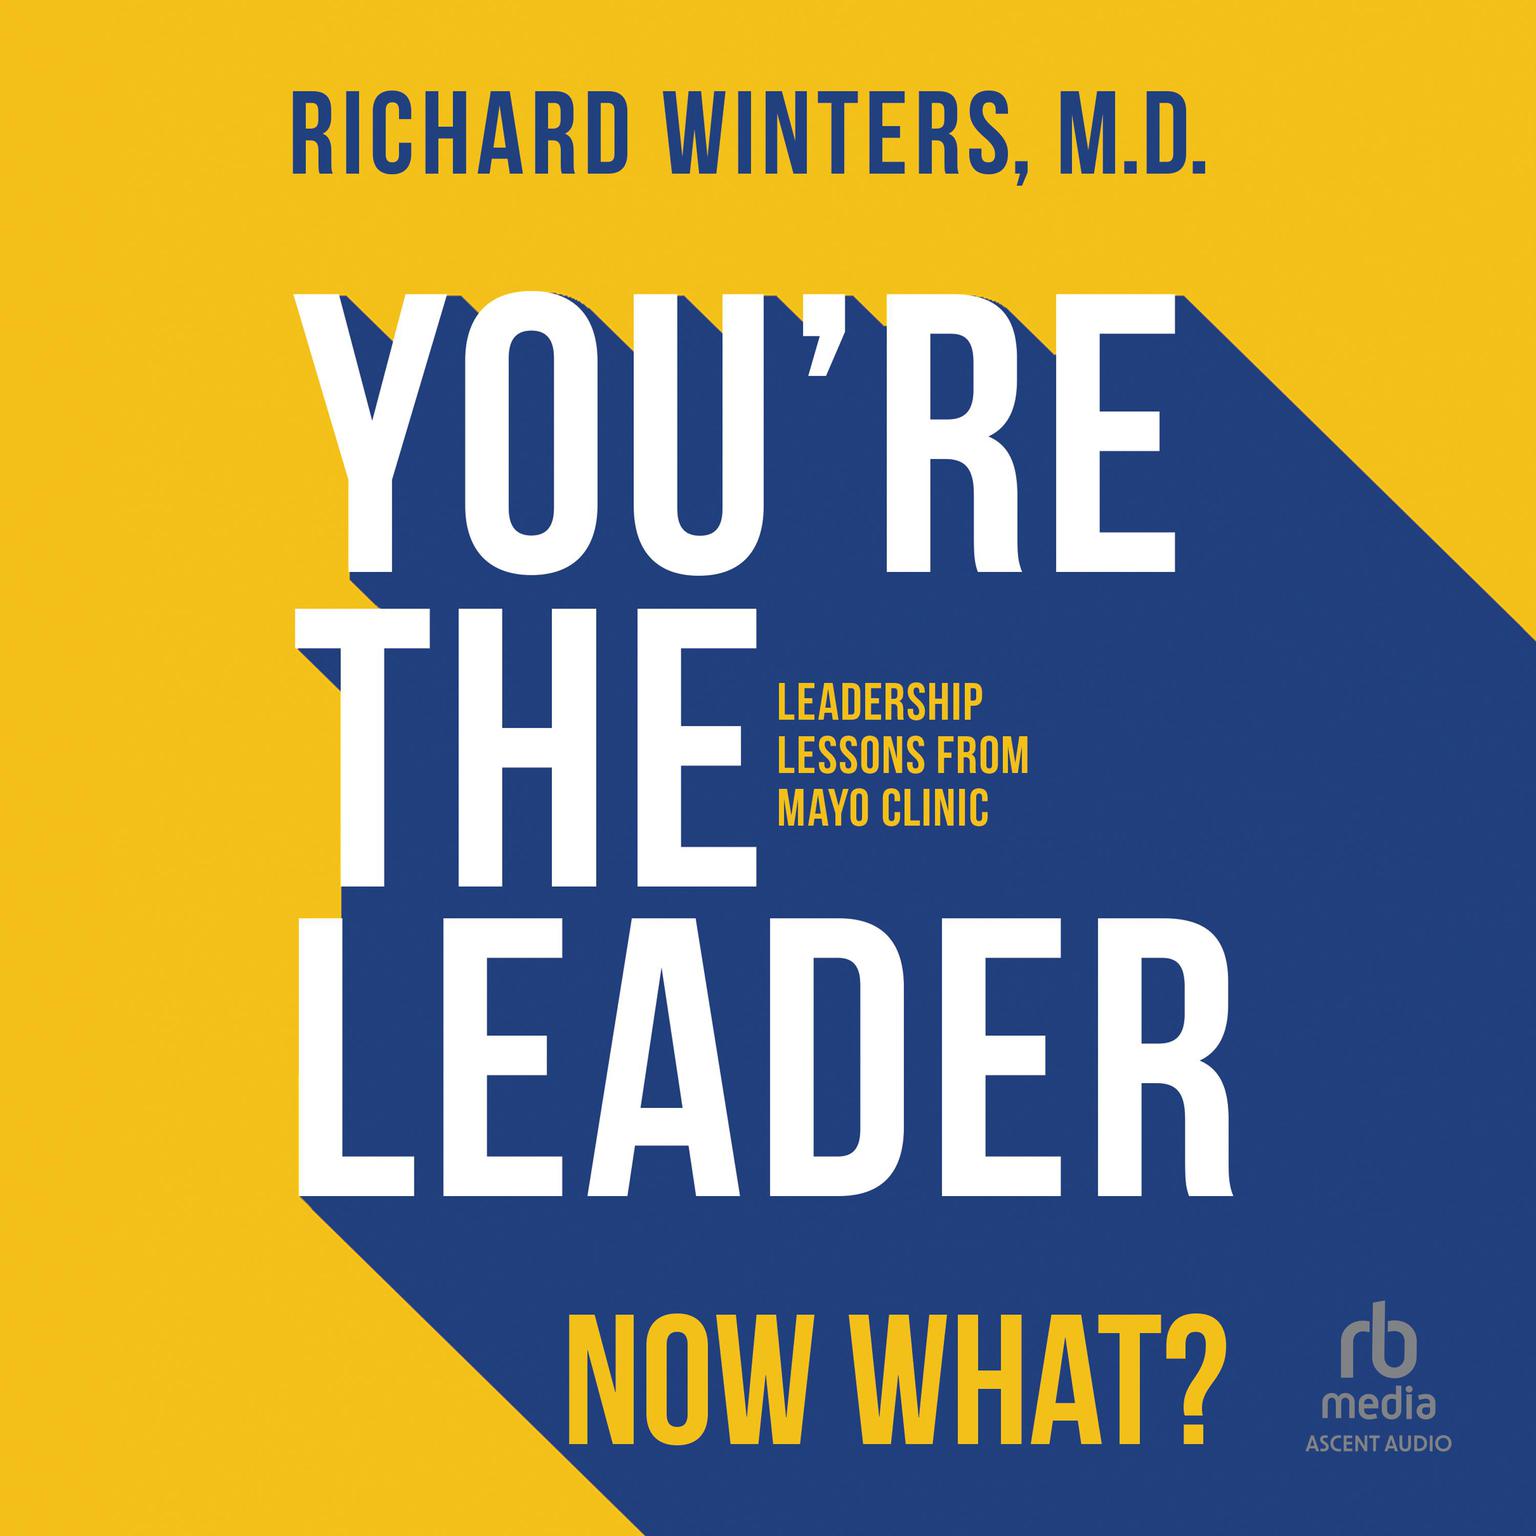 Youre the Leader. Now What?: Leadership Lessons from Mayo Clinic Audiobook, by Richard Winters